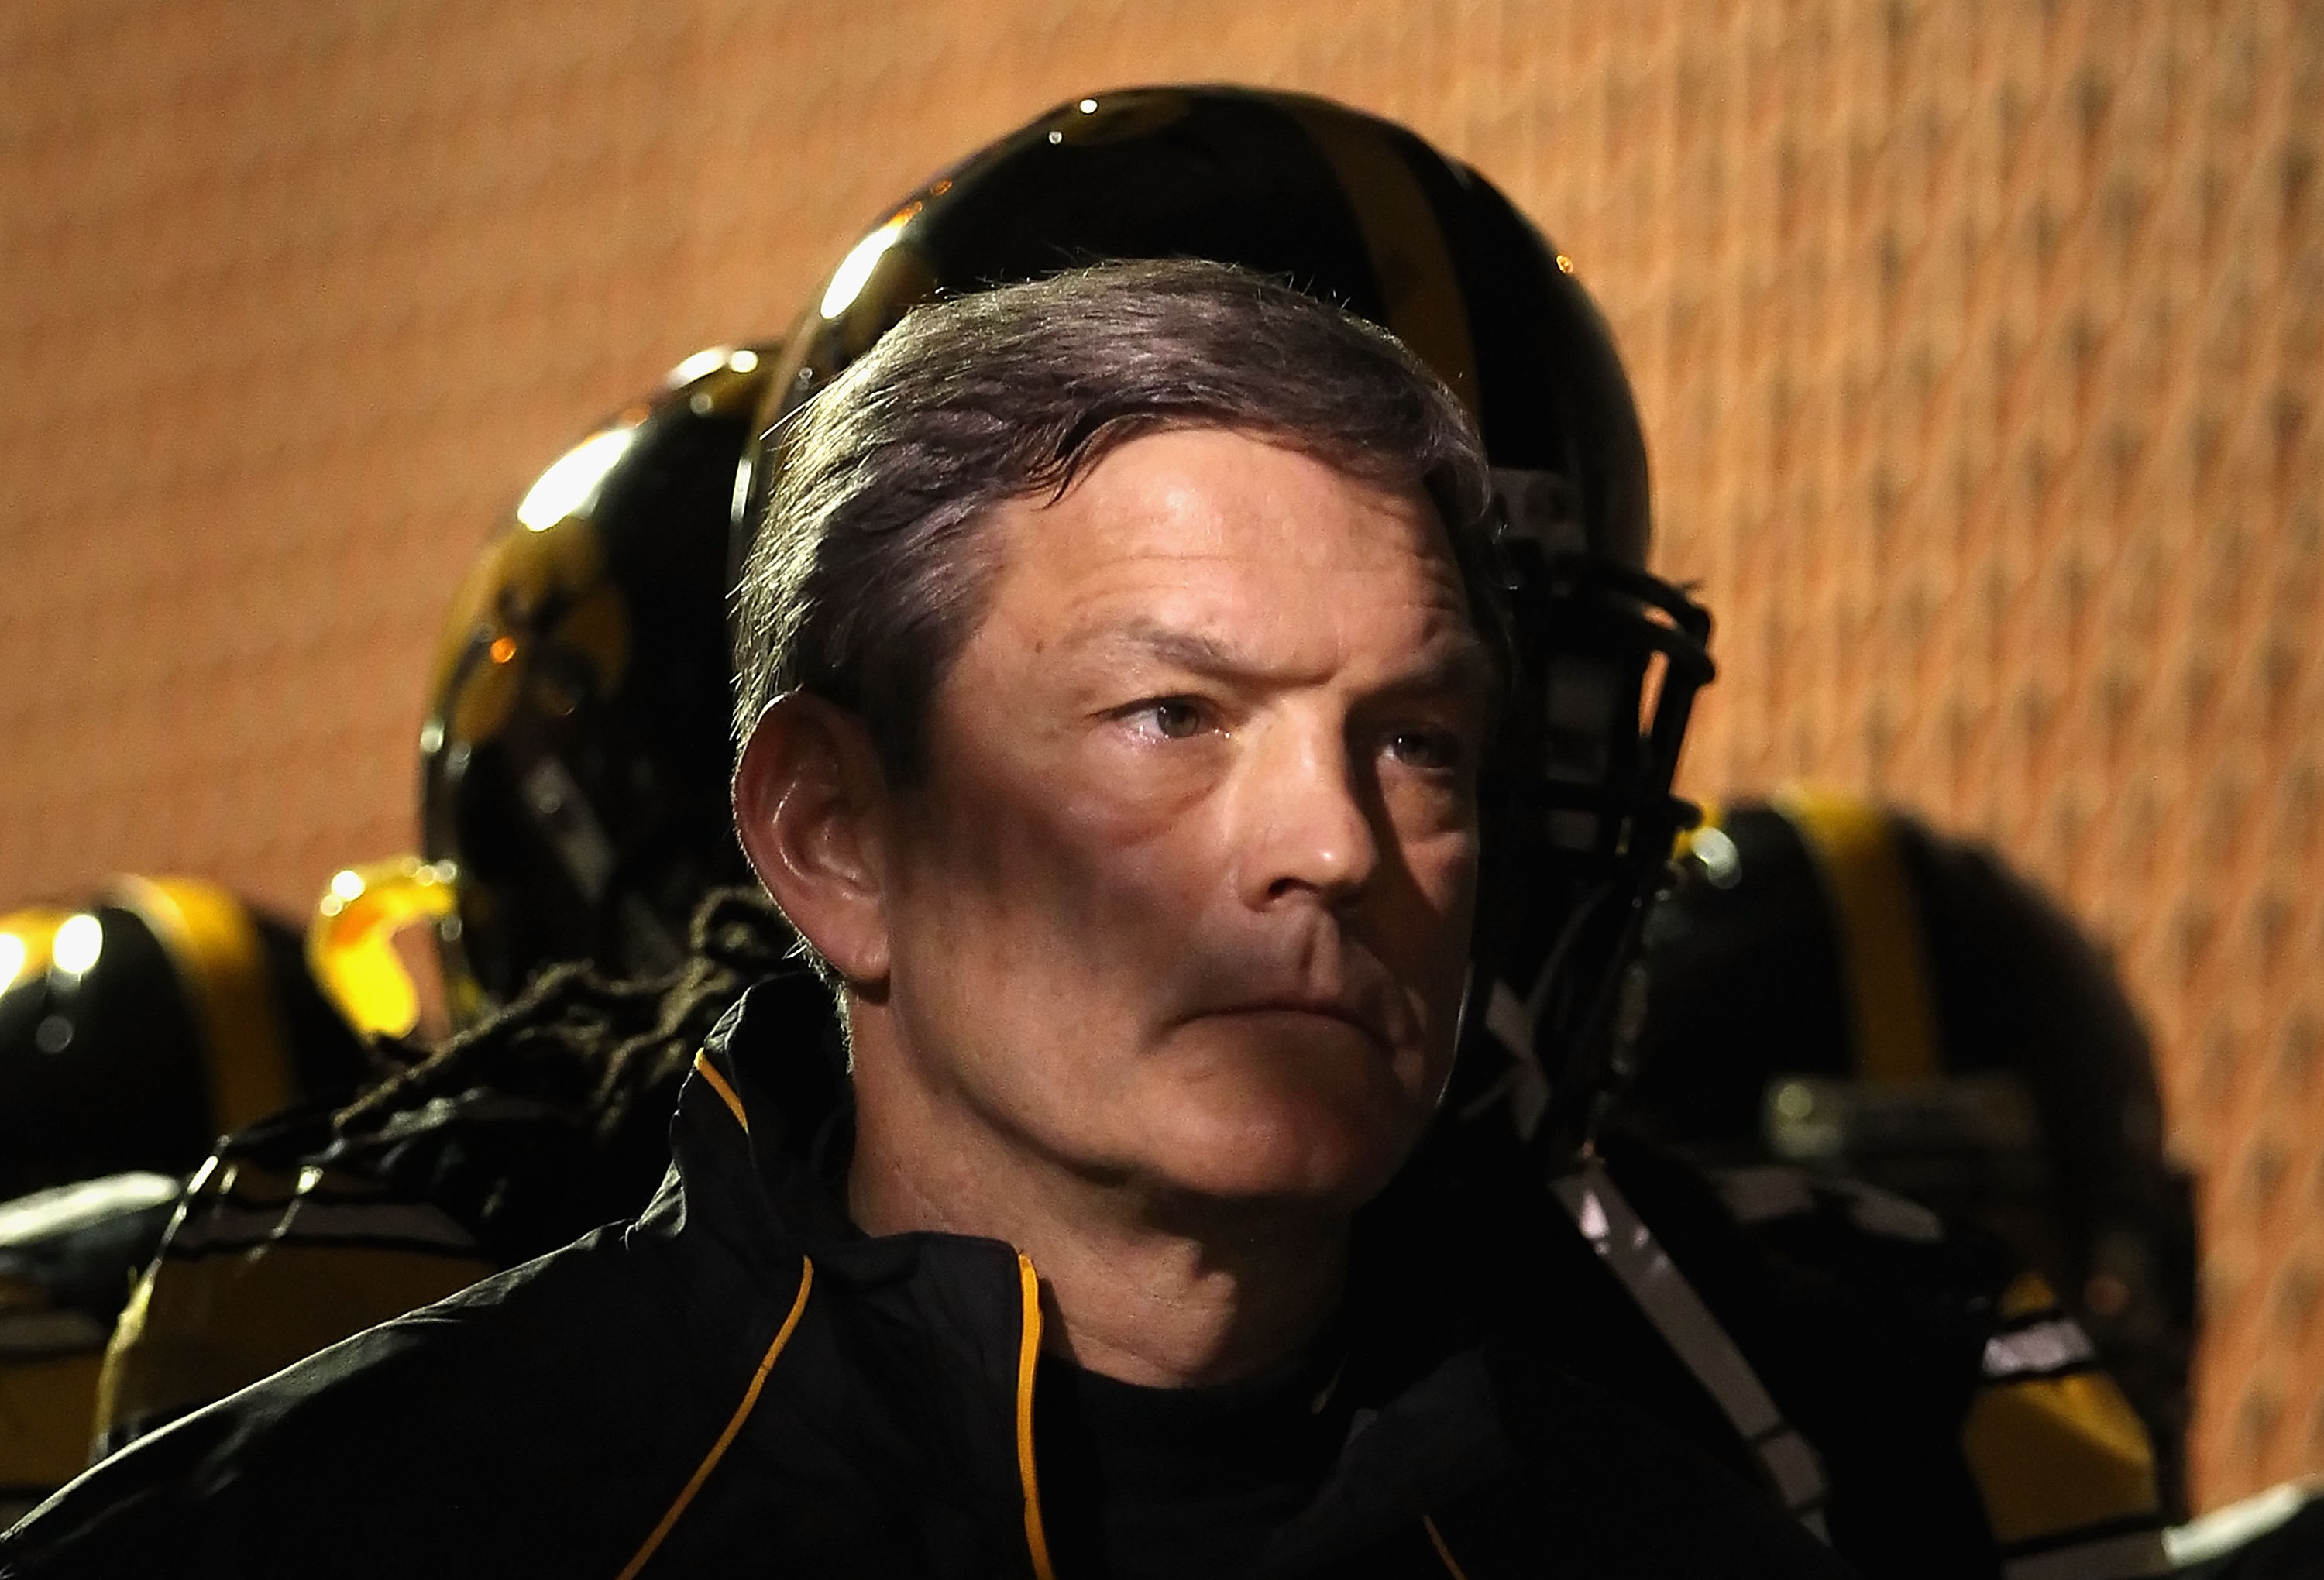 TEMPE, AZ - DECEMBER 28:  Head coach Kirk Ferentz of the Iowa Hawkeyes stands in the tunnel before the Insight Bowl against the Missouri Tigers at Sun Devil Stadium on December 28, 2010 in Tempe, Arizona.  The Hawkeyes defeated the Tigers 27-24.  (Photo b